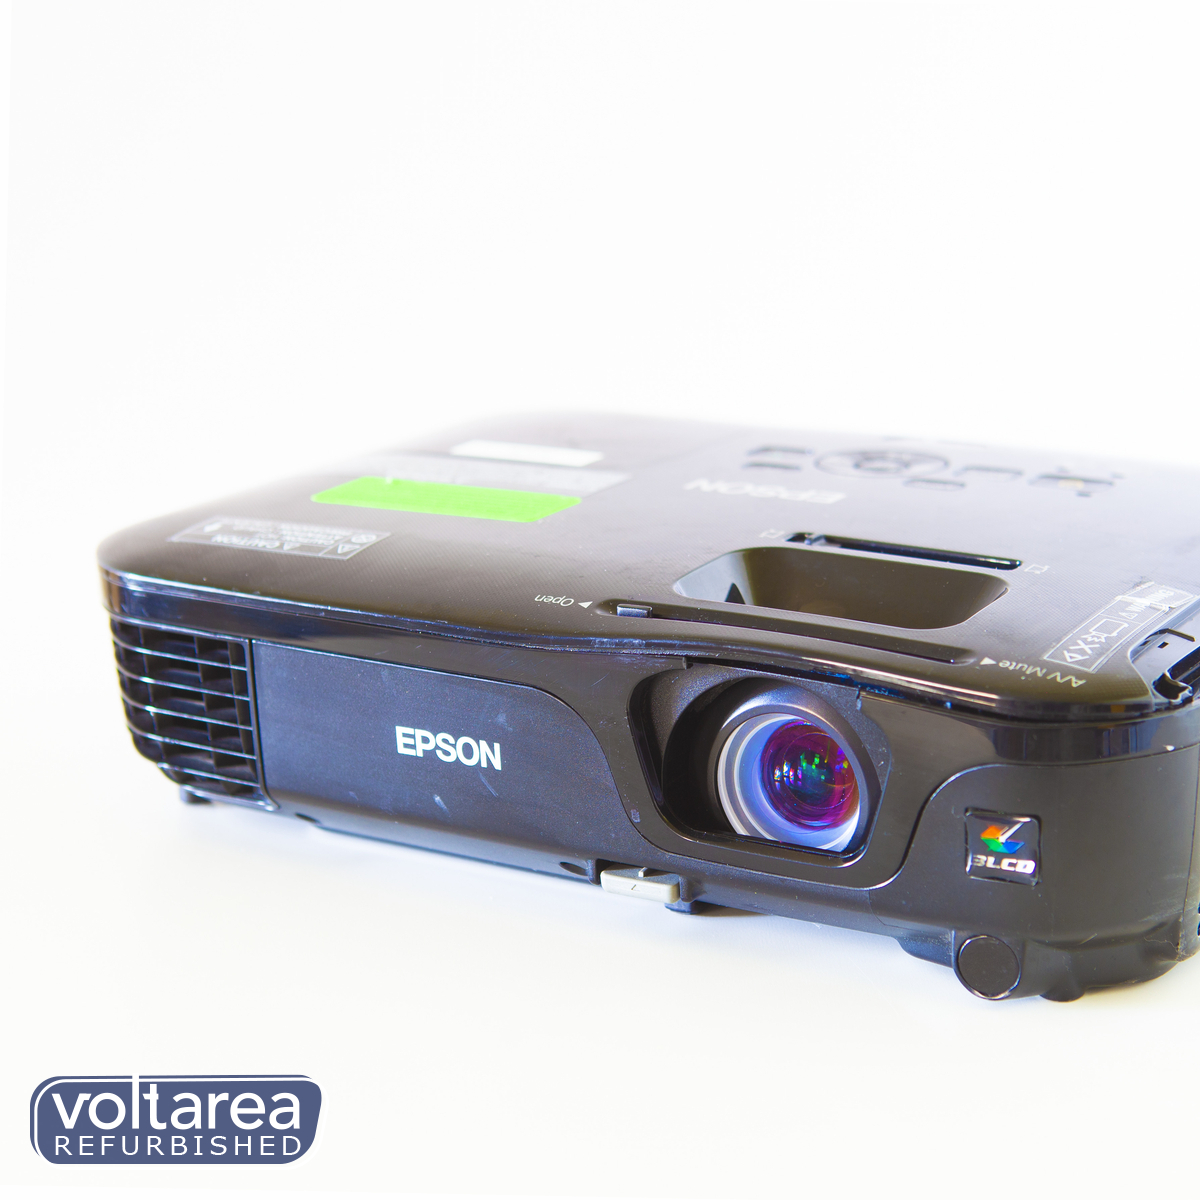 Epson ex5210 Normal Throw Projector [Refurbished]